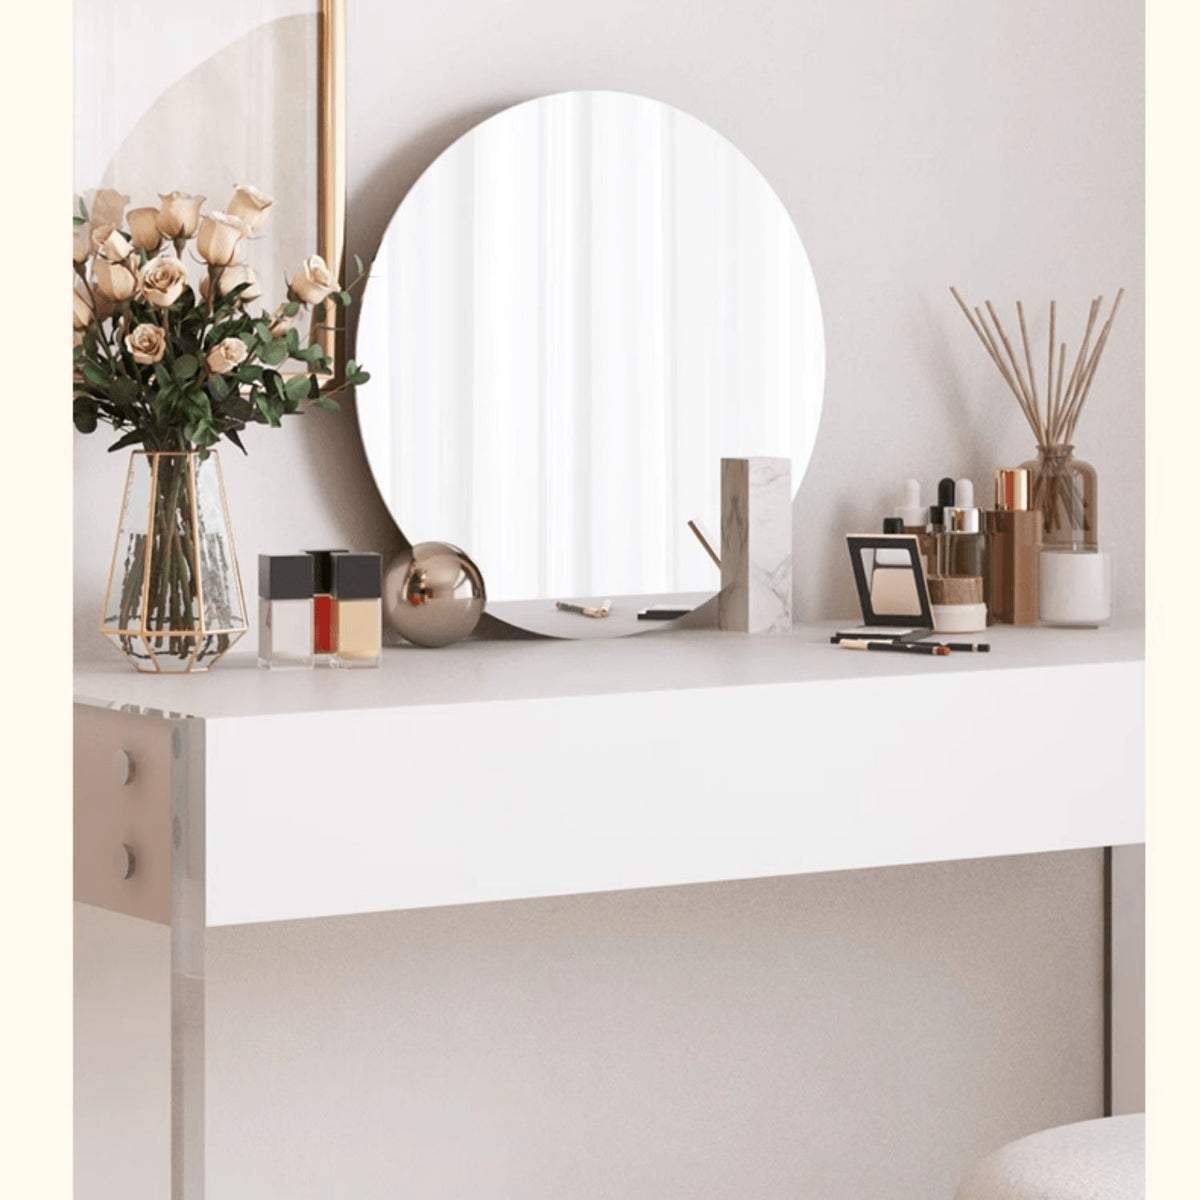 Elegant Mirror Silvery Glass – Perfect Reflective Finish for Modern Interiors yw-187